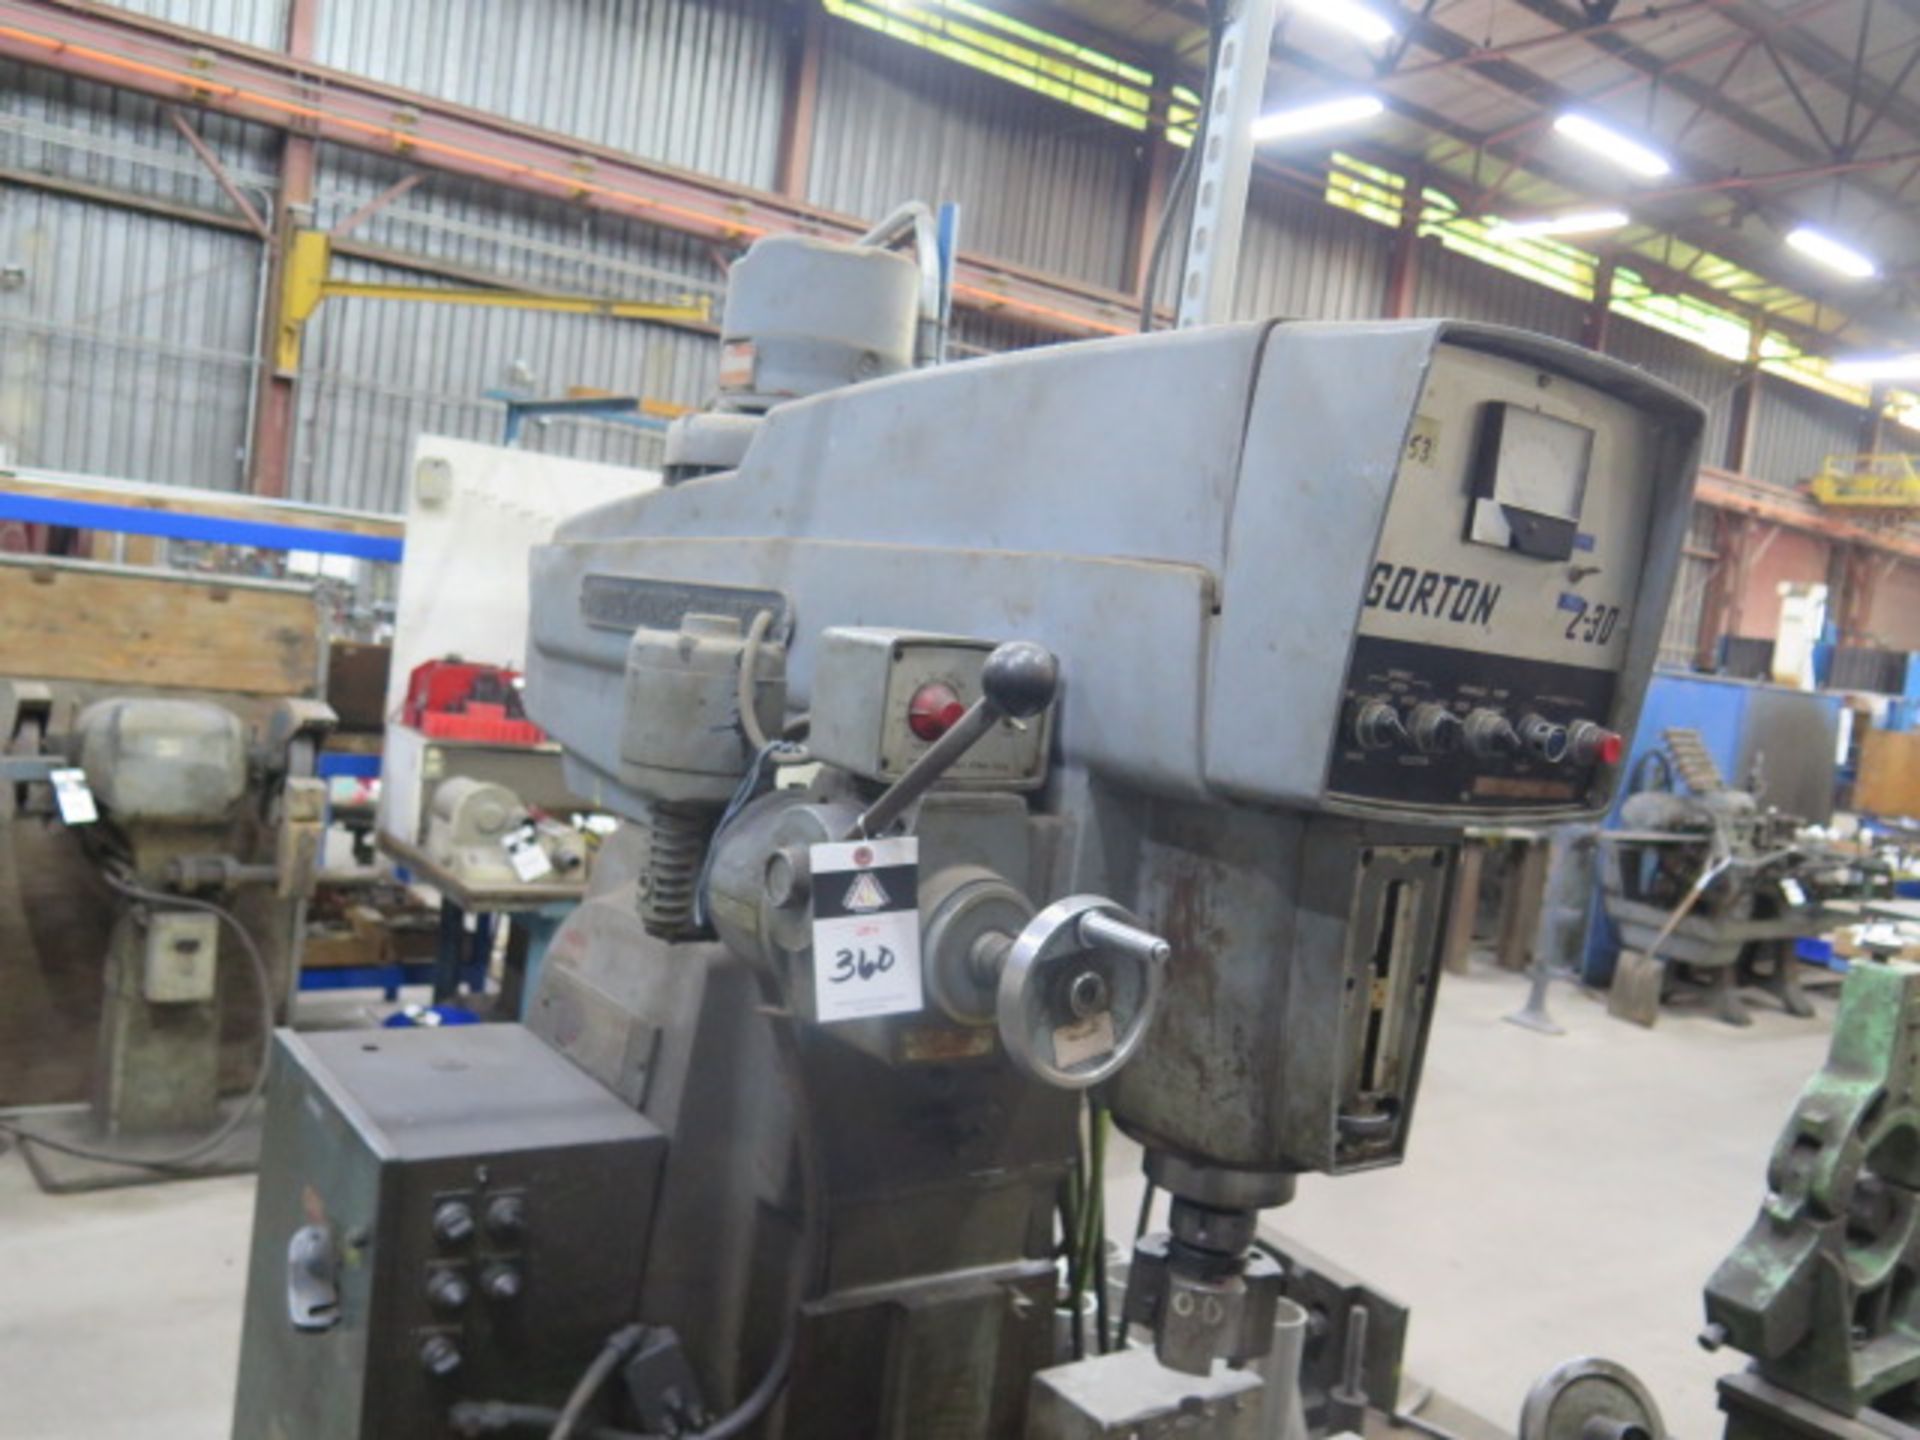 Gorton 2-30 Auto Trace Master Vertical Mill w/ Universal Kwik-Switch Taper Spindle, SOLD AS IS - Bild 3 aus 9